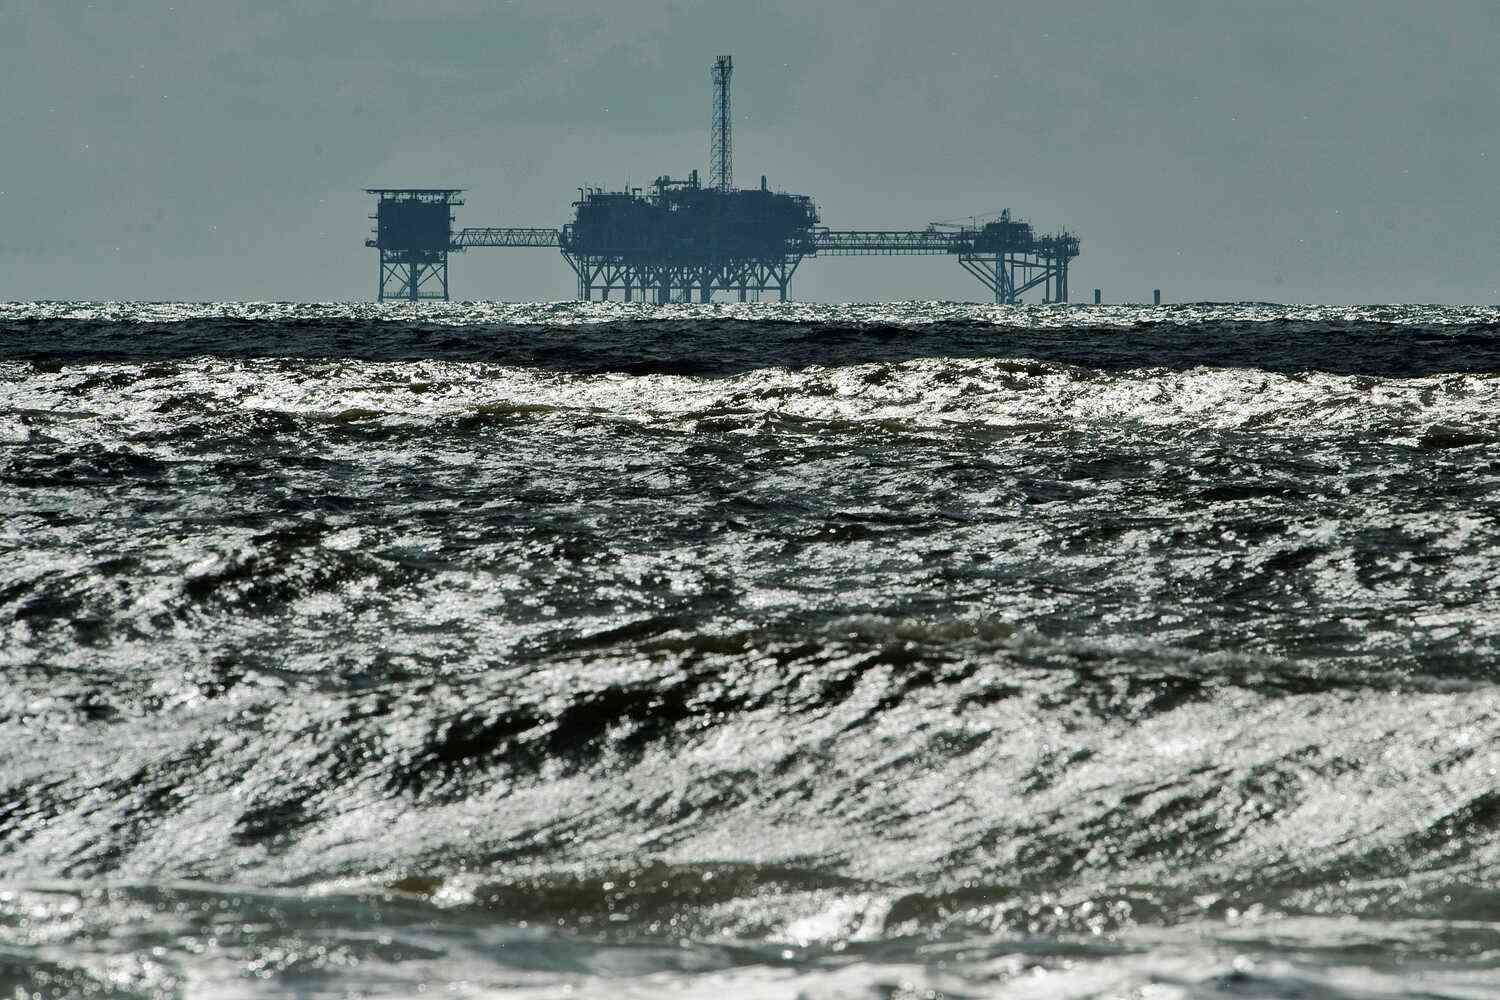 Sec. Perry’s comments suggest climate change may benefit offshore drilling